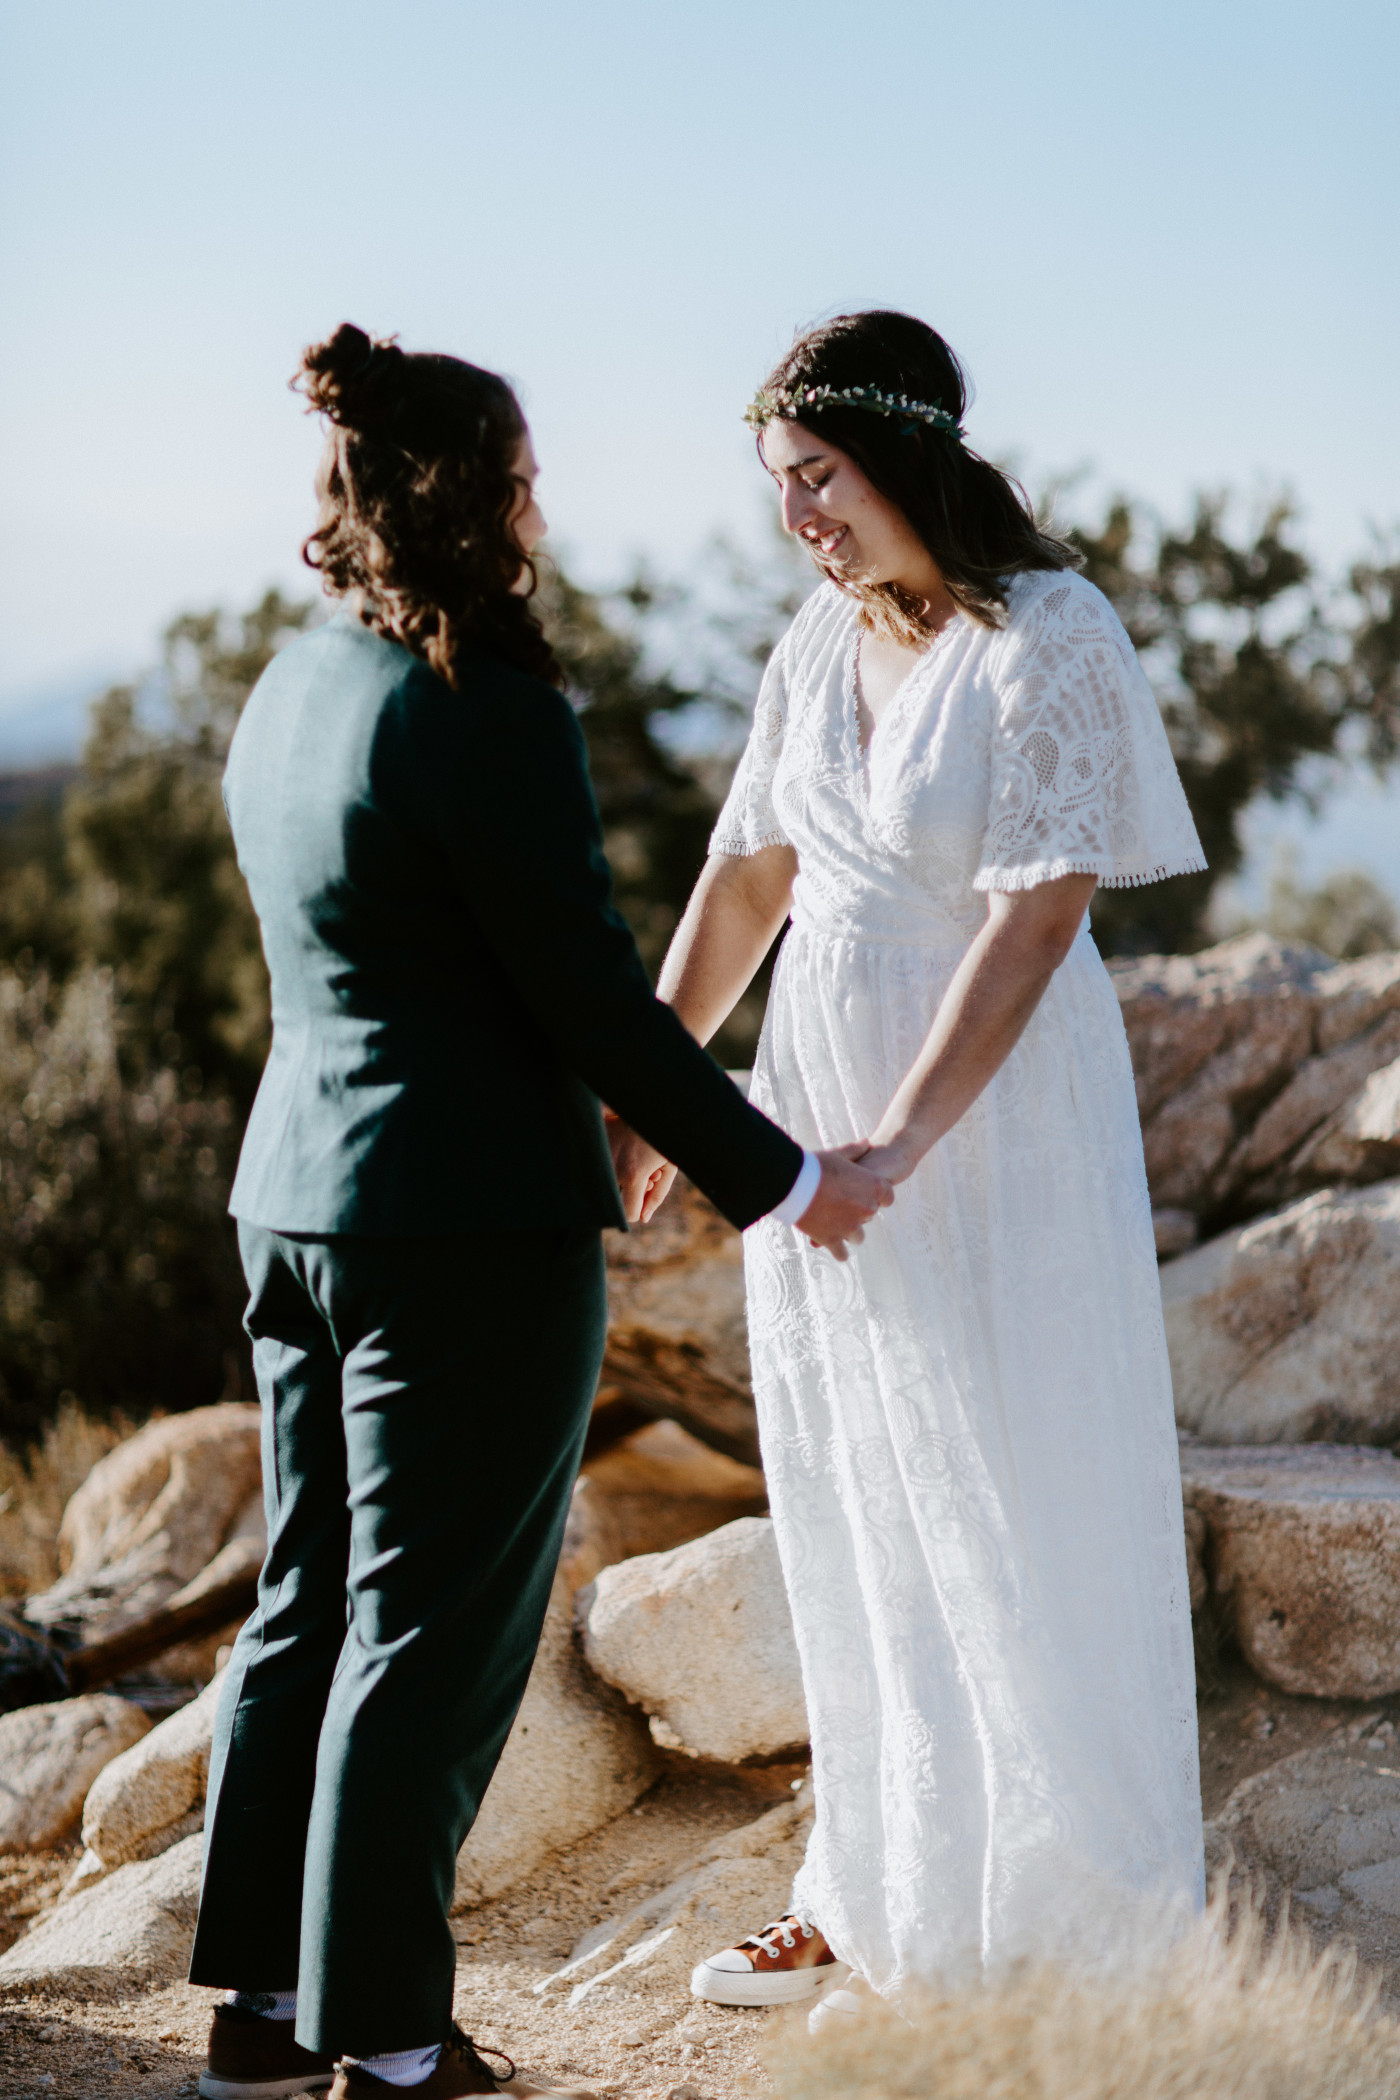 Becca and Madison stand together during their elopement.